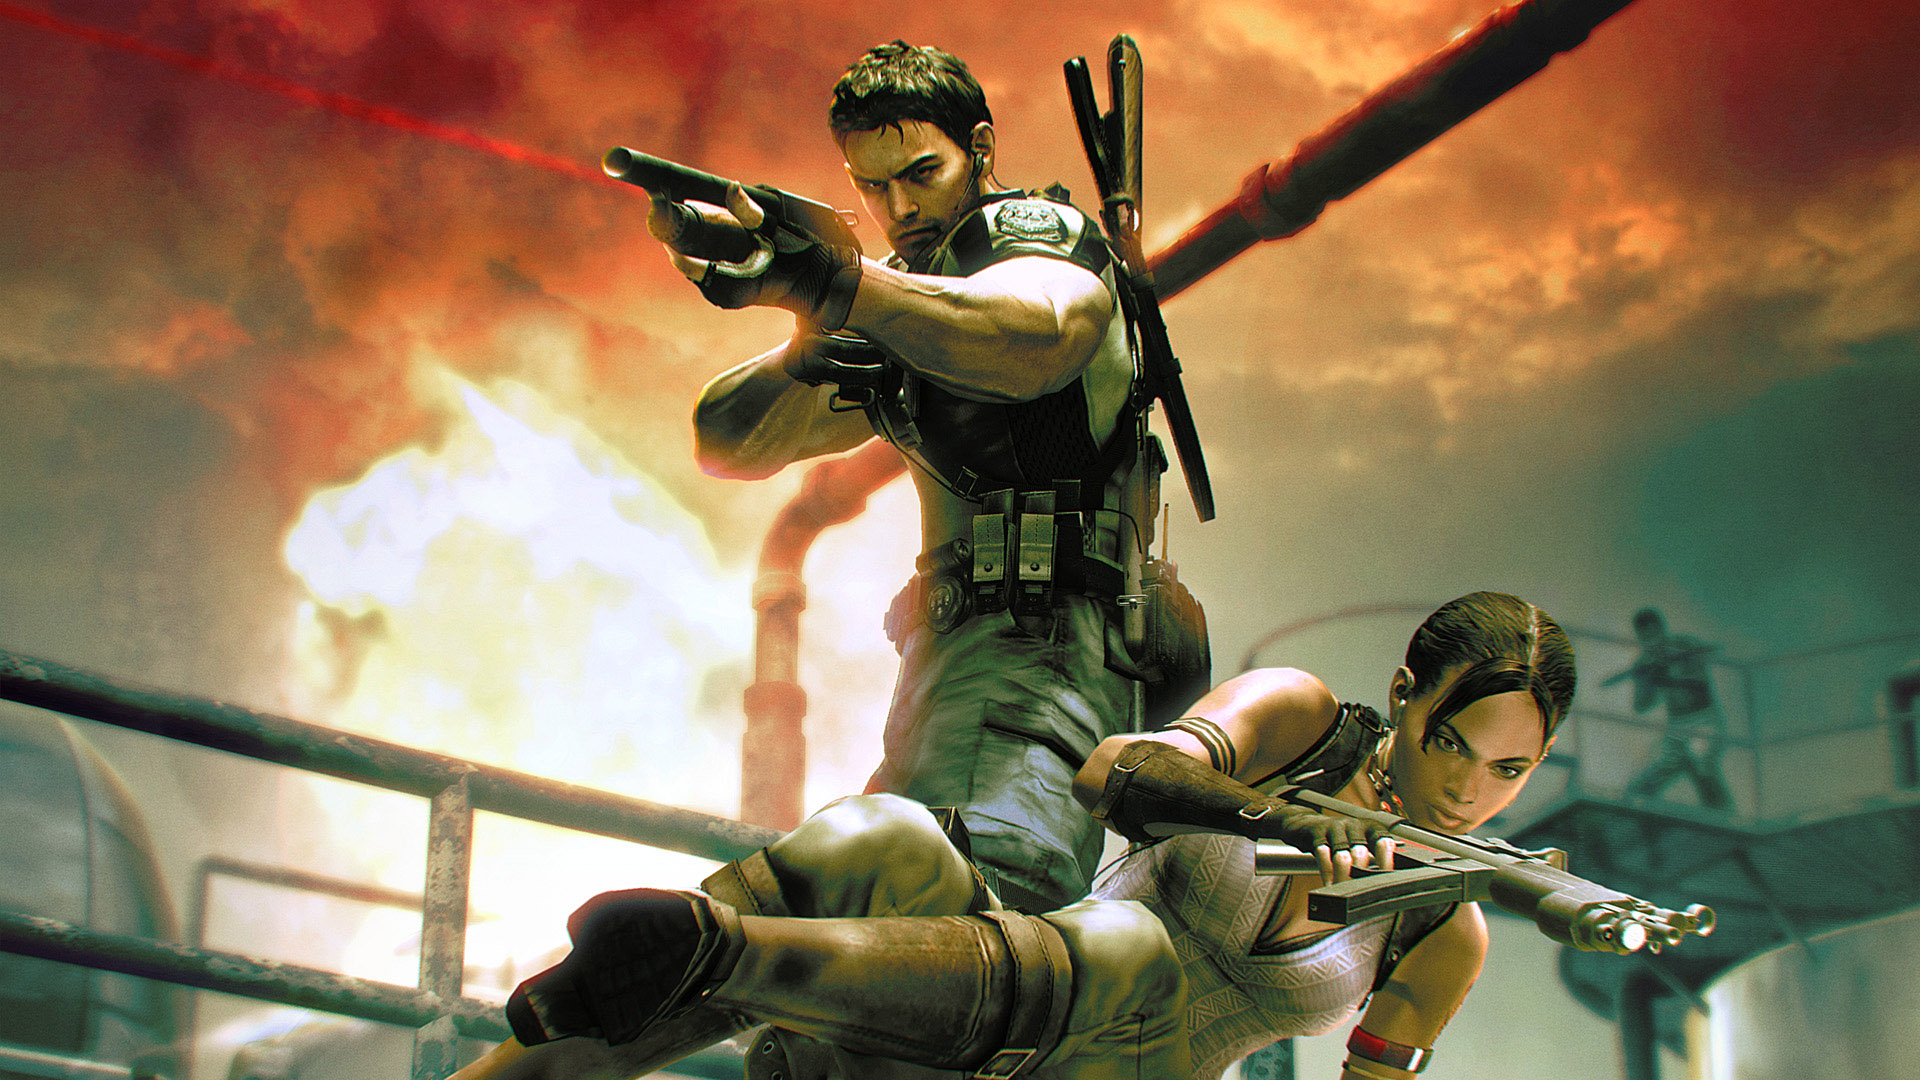 Chris Redfield and Sheva Alomar battling zombies in a video game: Resident Evil 5.